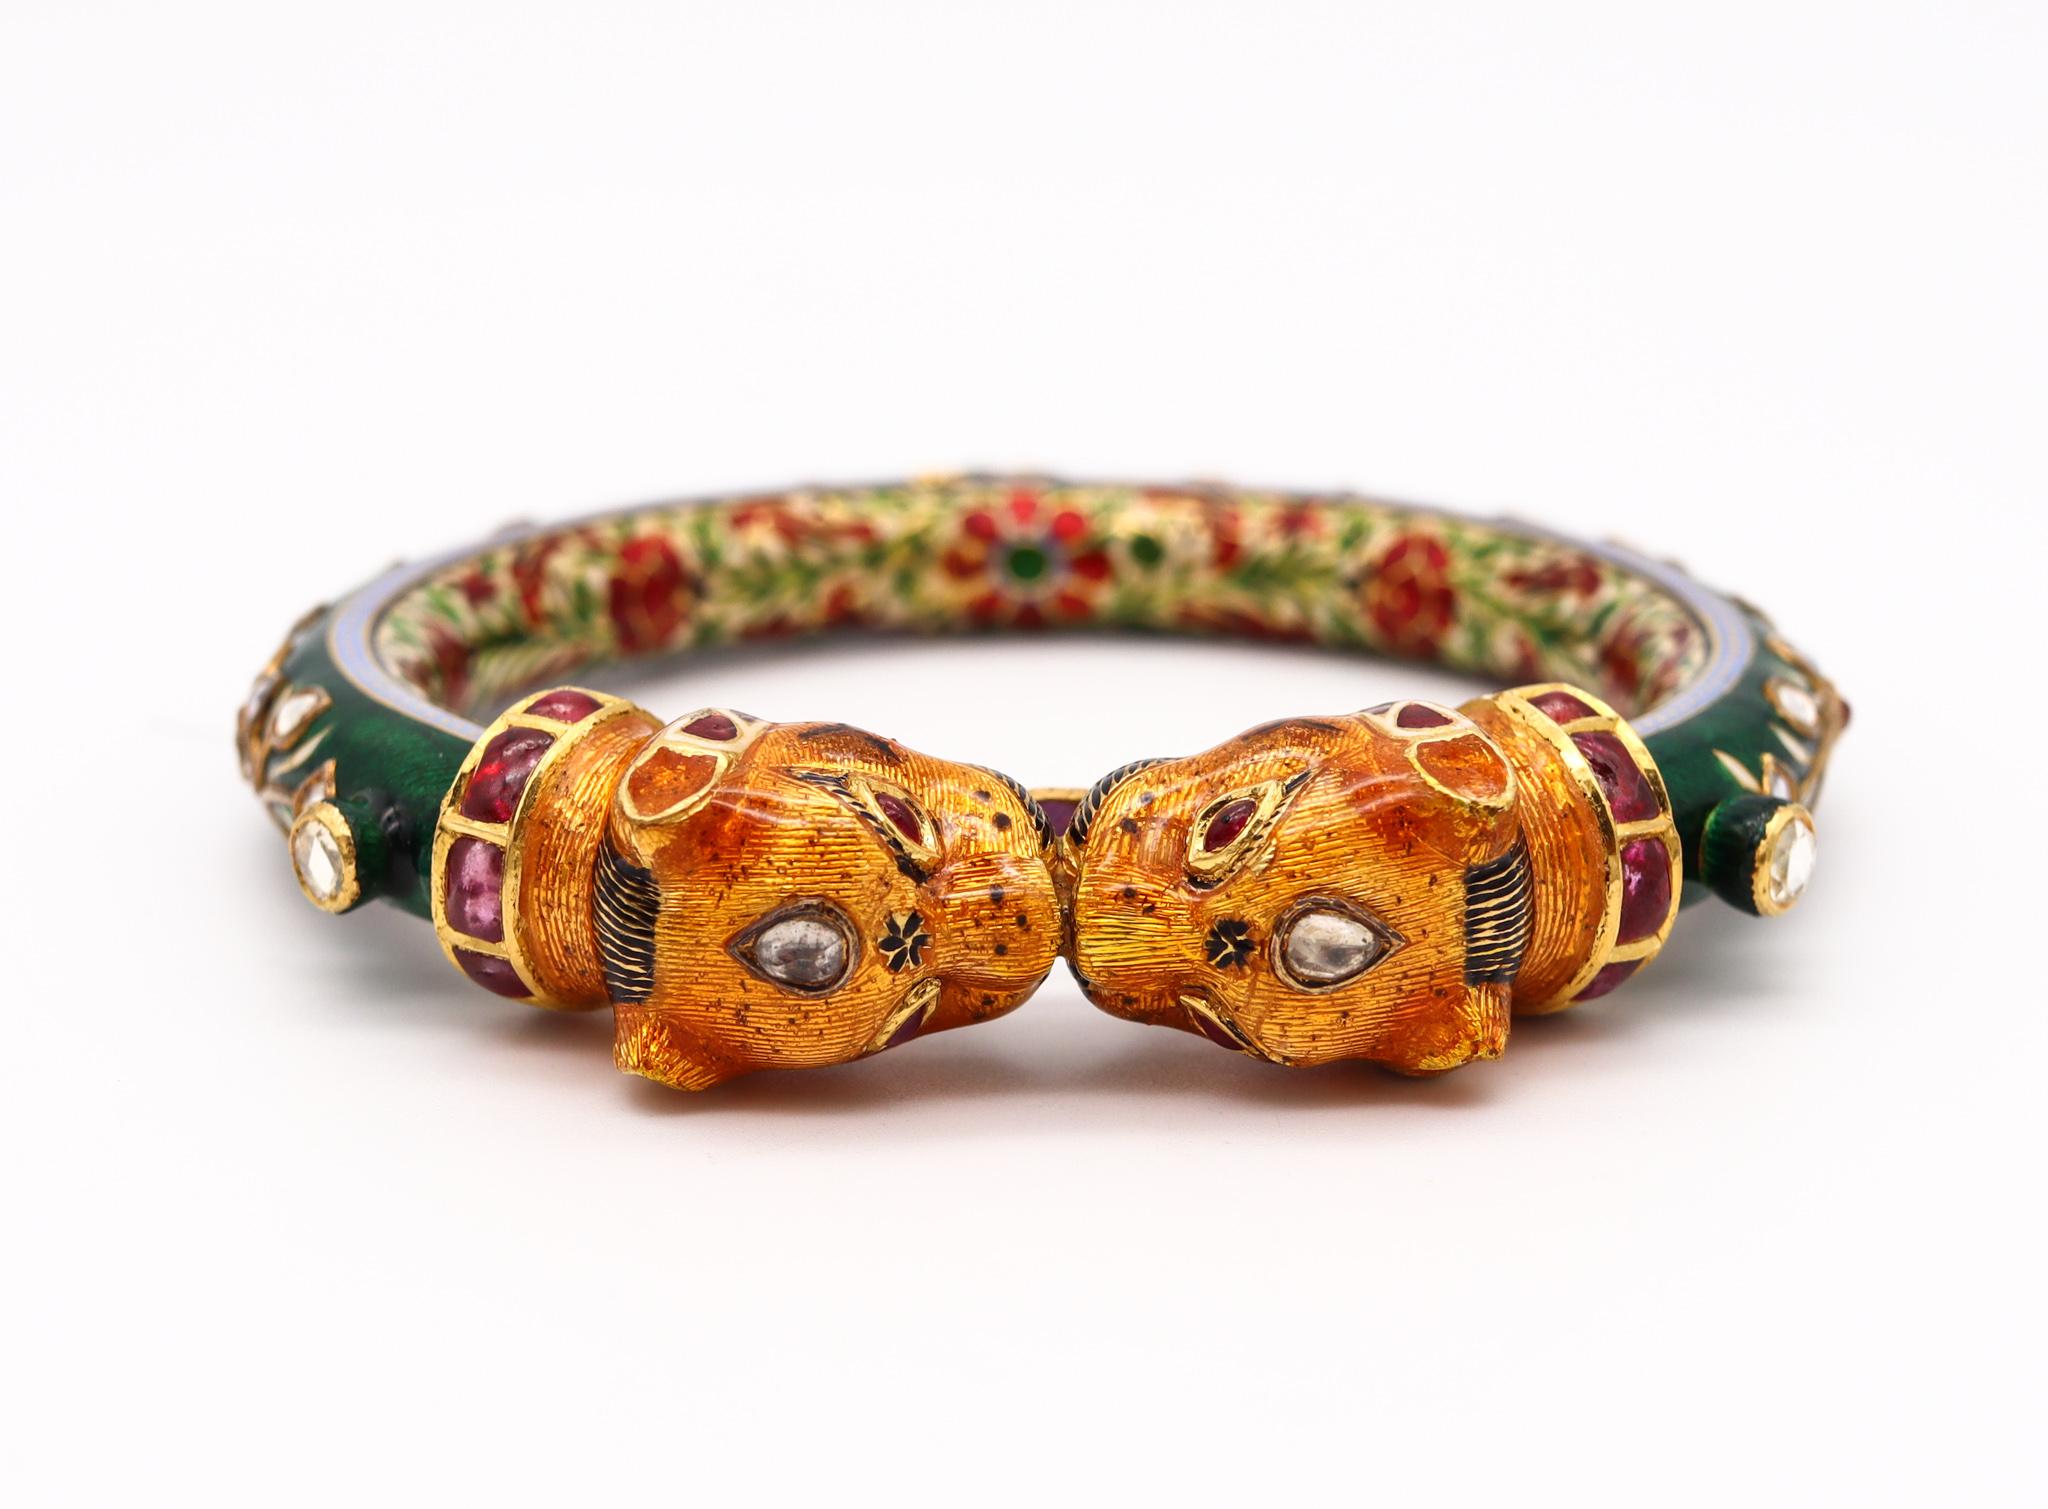 Gem set decorated lions bangle from the Mughal Empire.

Magnificent and colorful vintage bracelet, created in the ancient Mughal Empire style. This gorgeous bangle bracelet has been carefully crafted in solid yellow gold of 22 karats with high